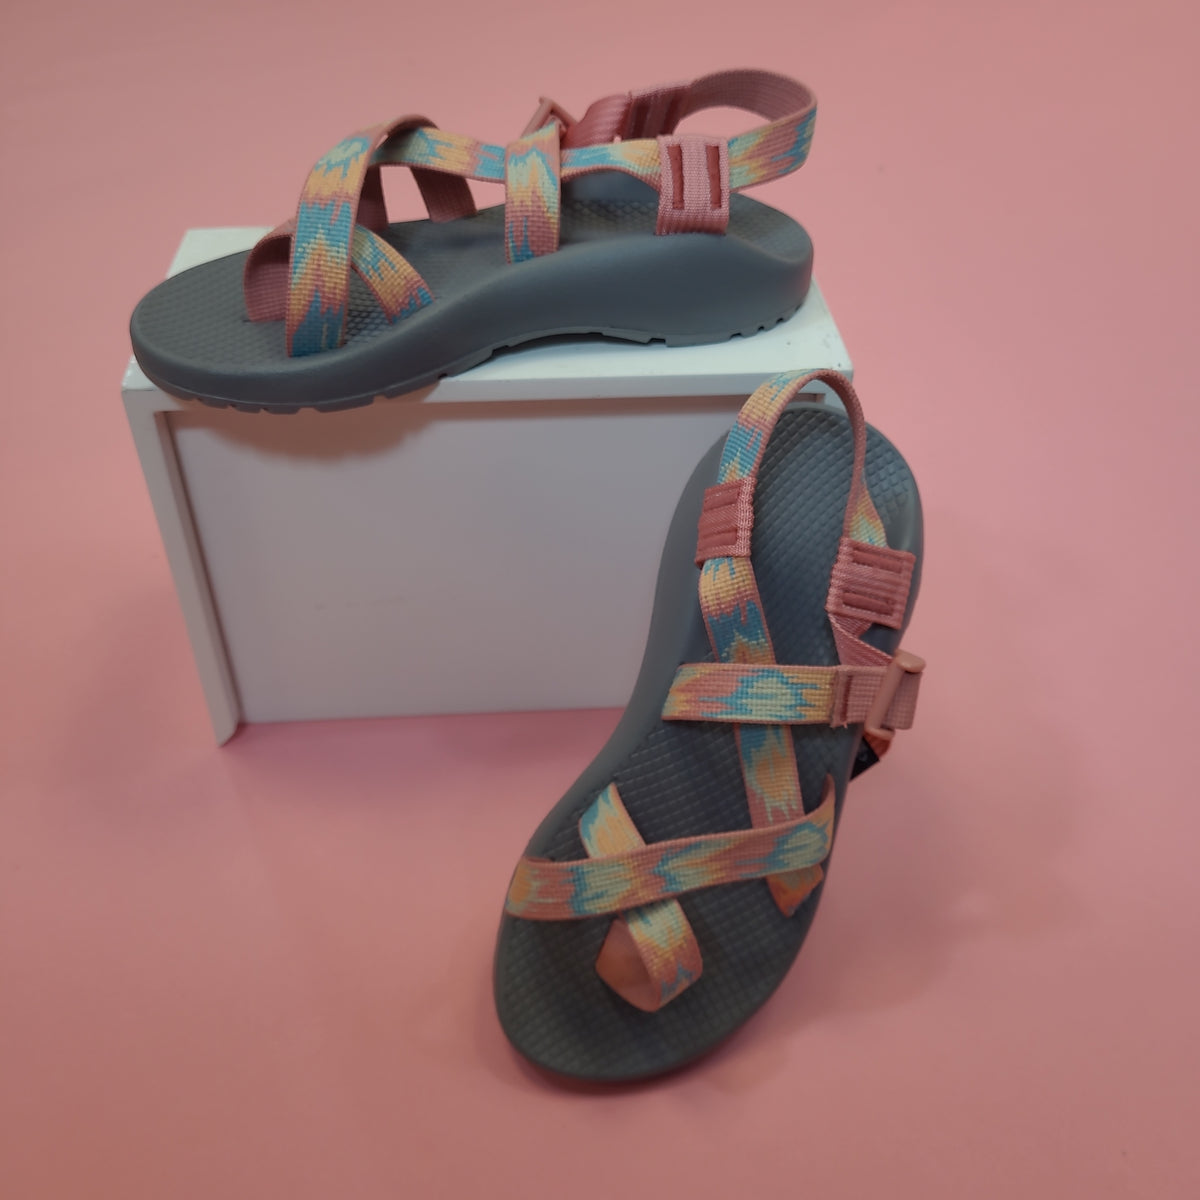 Classic Rose Chaco Sandal